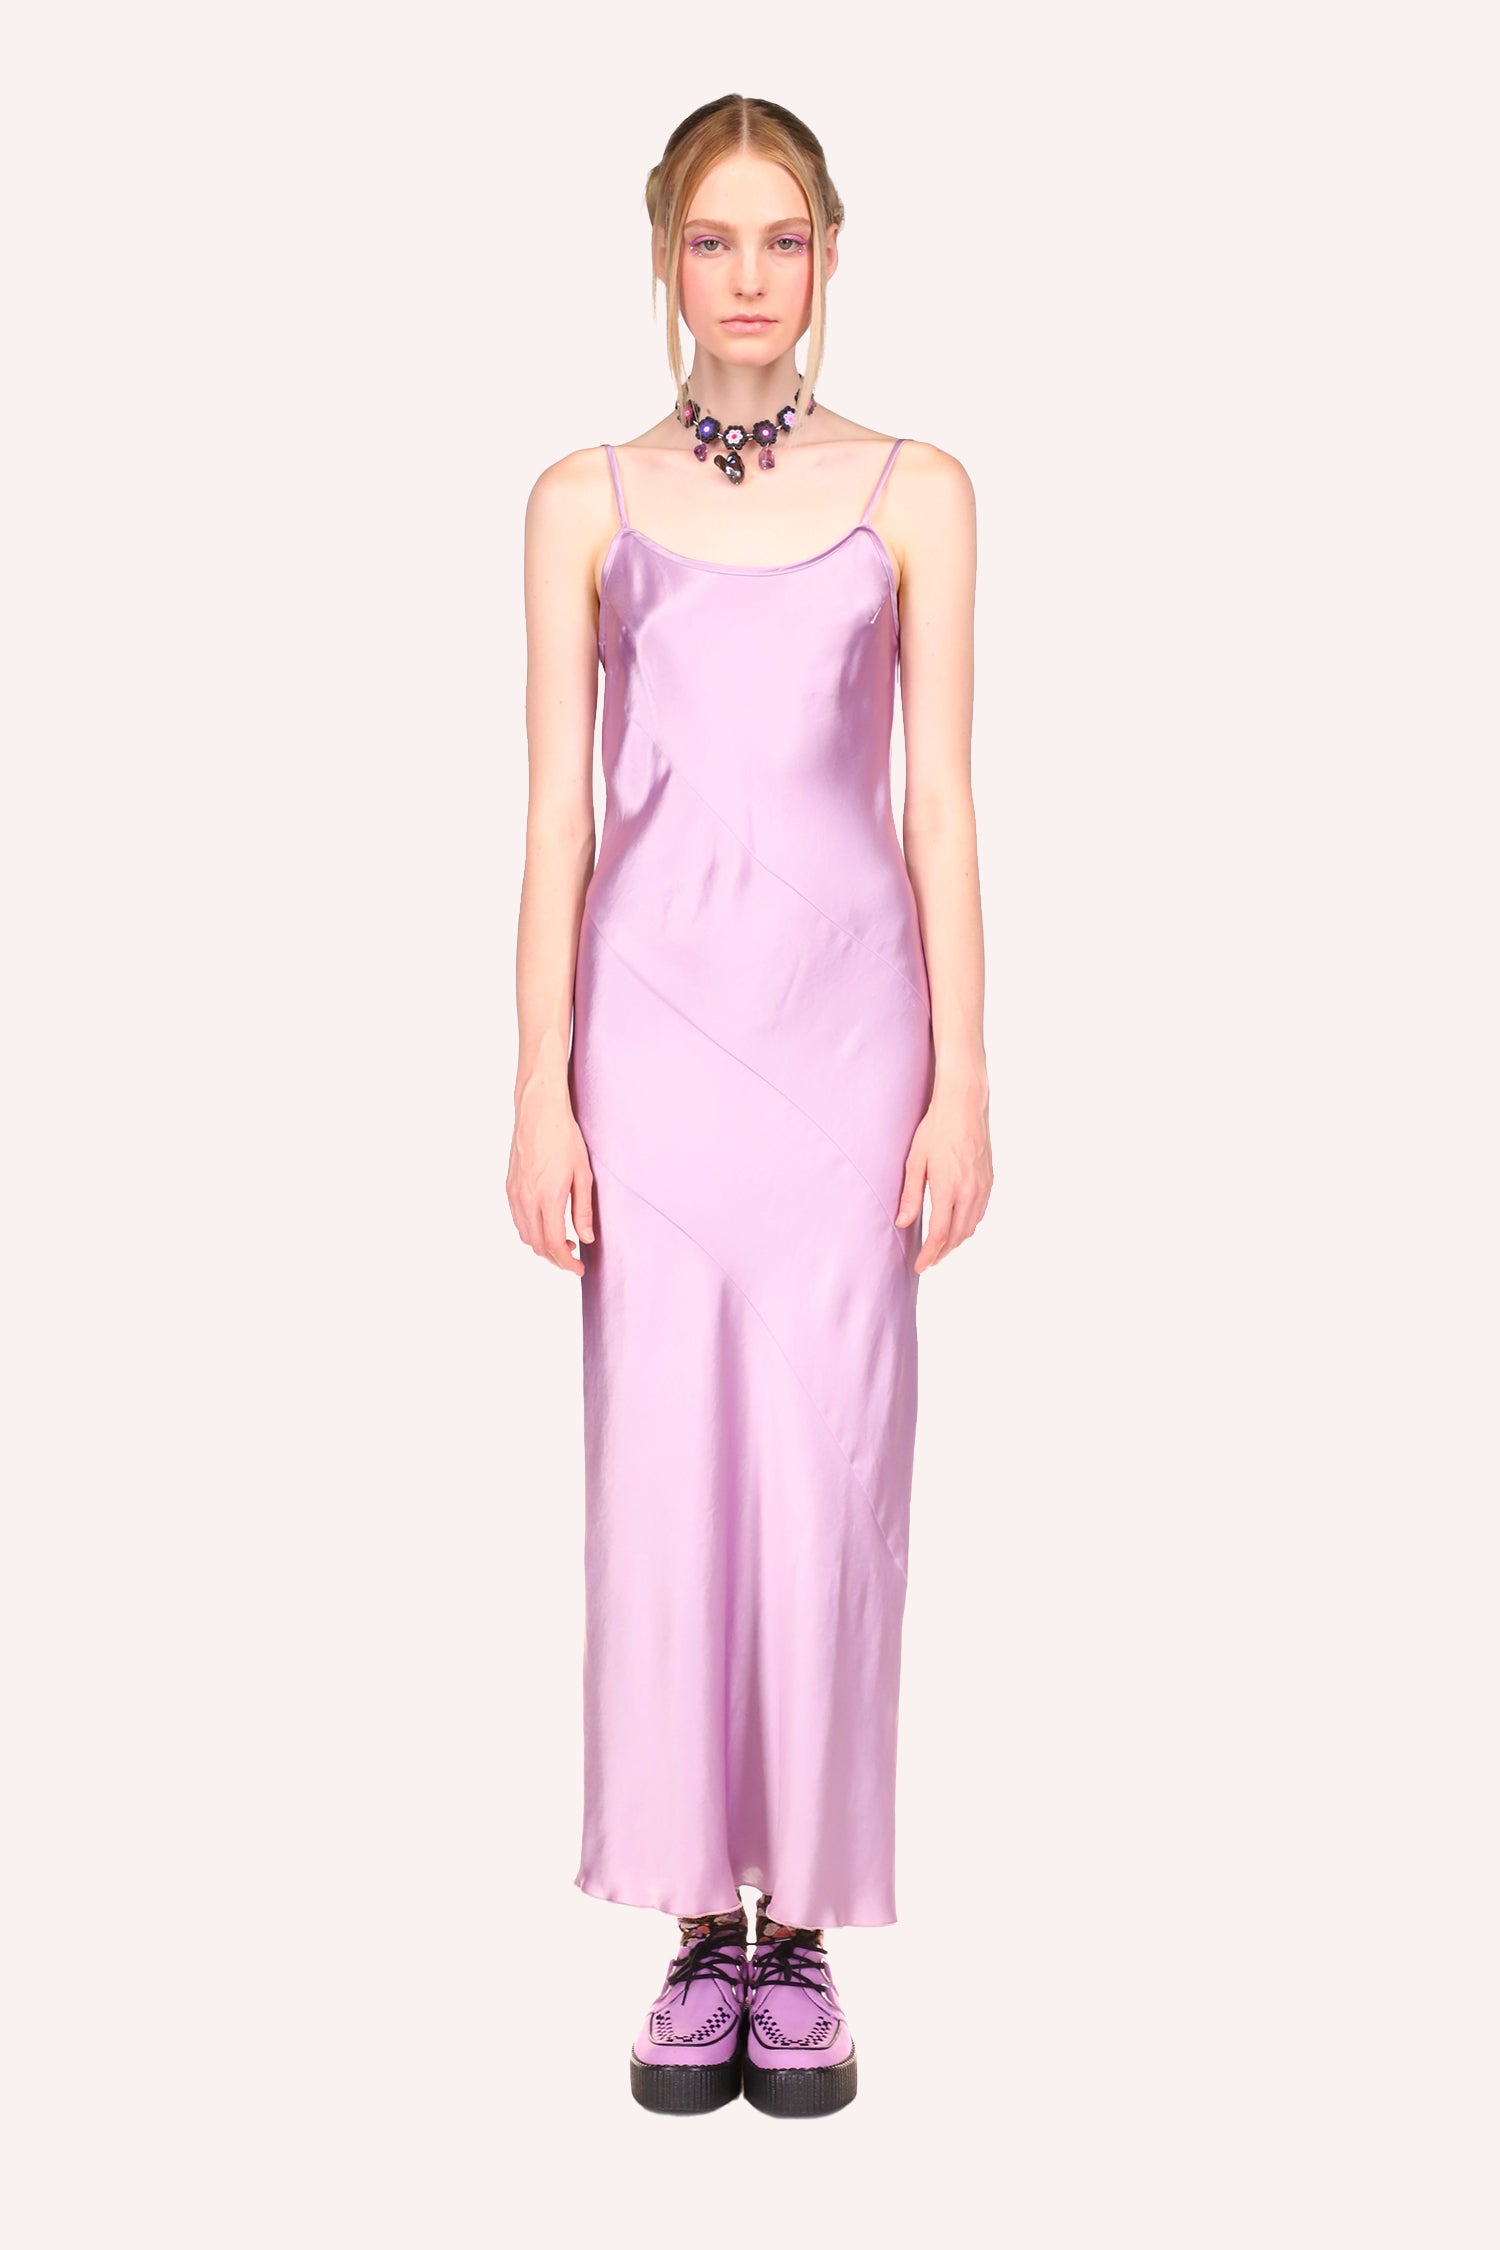 Washed Satin Slip Dress lavender, sleeveless dress with two straps, a round collar cut, ankle length, and a diagonal wrap.